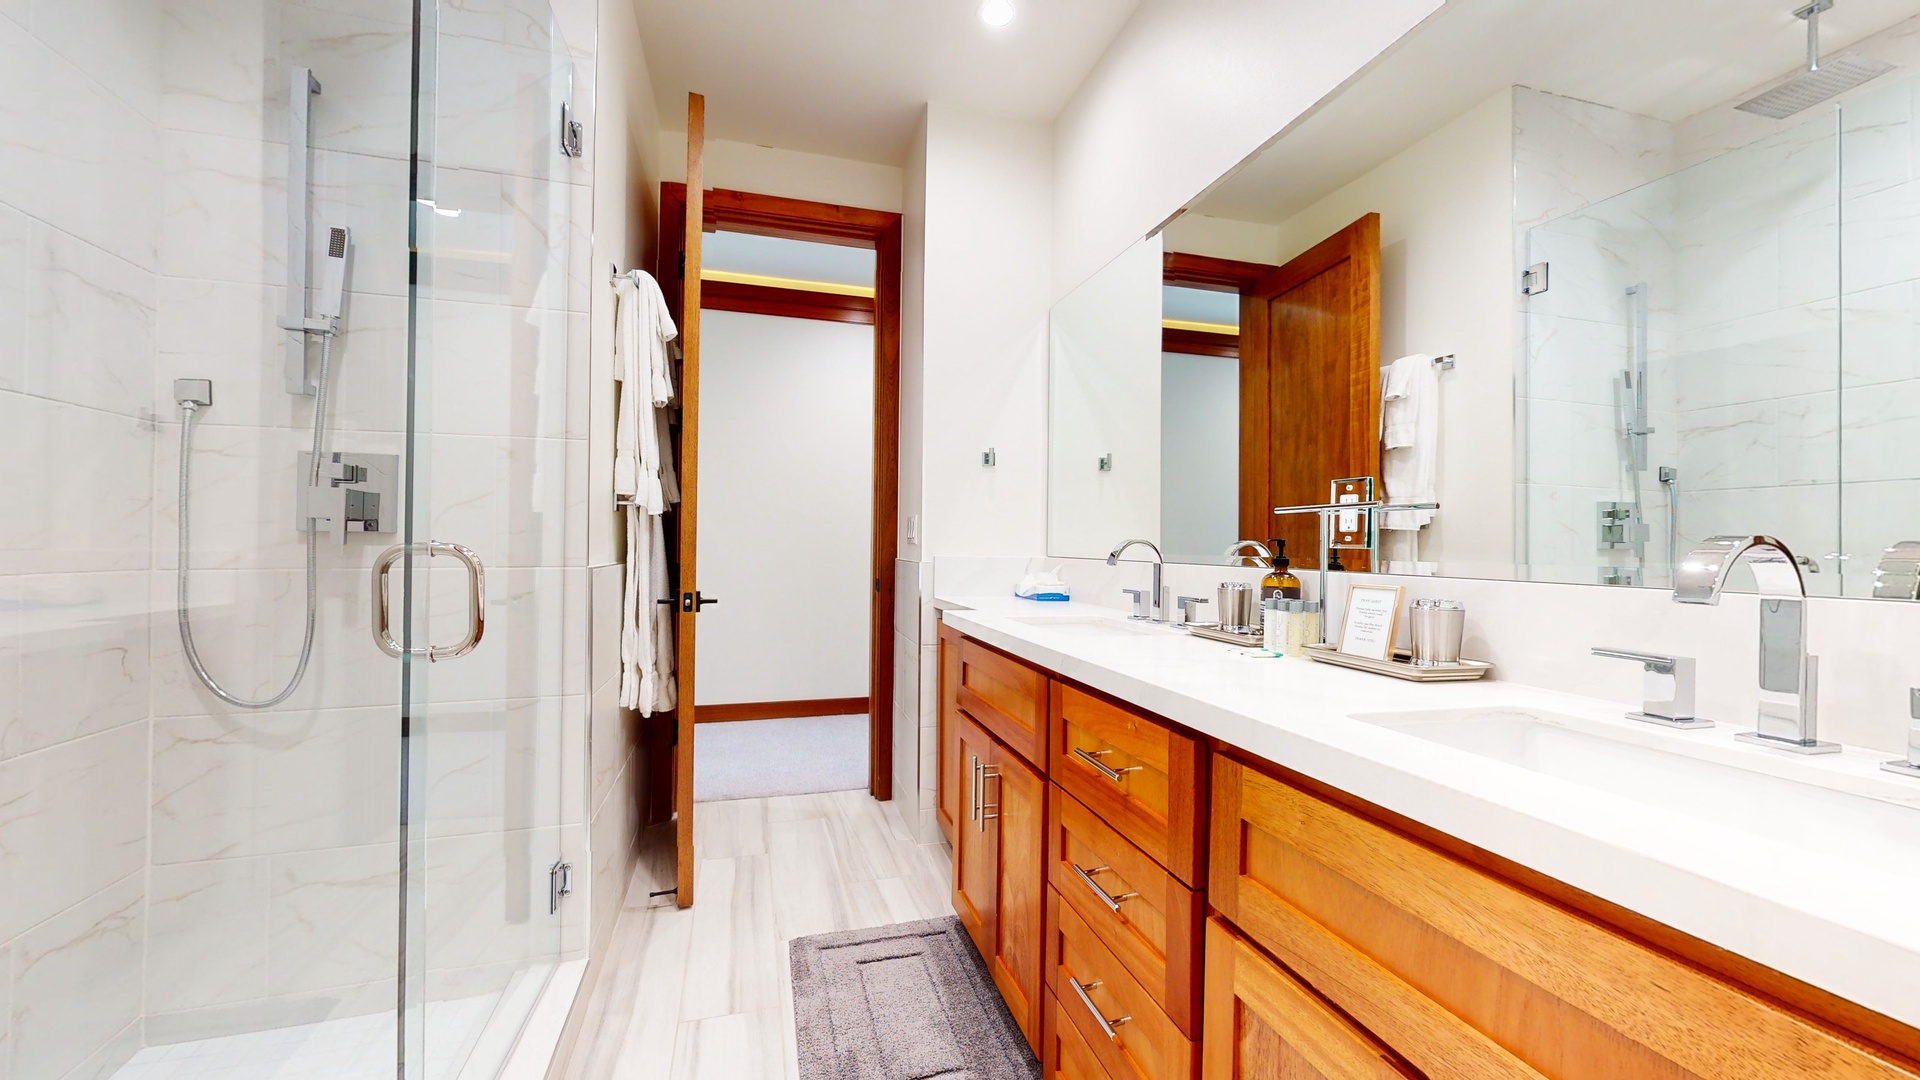 The 3rd floor hall bath offers a sprawling double vanity and gorgeous glass shower